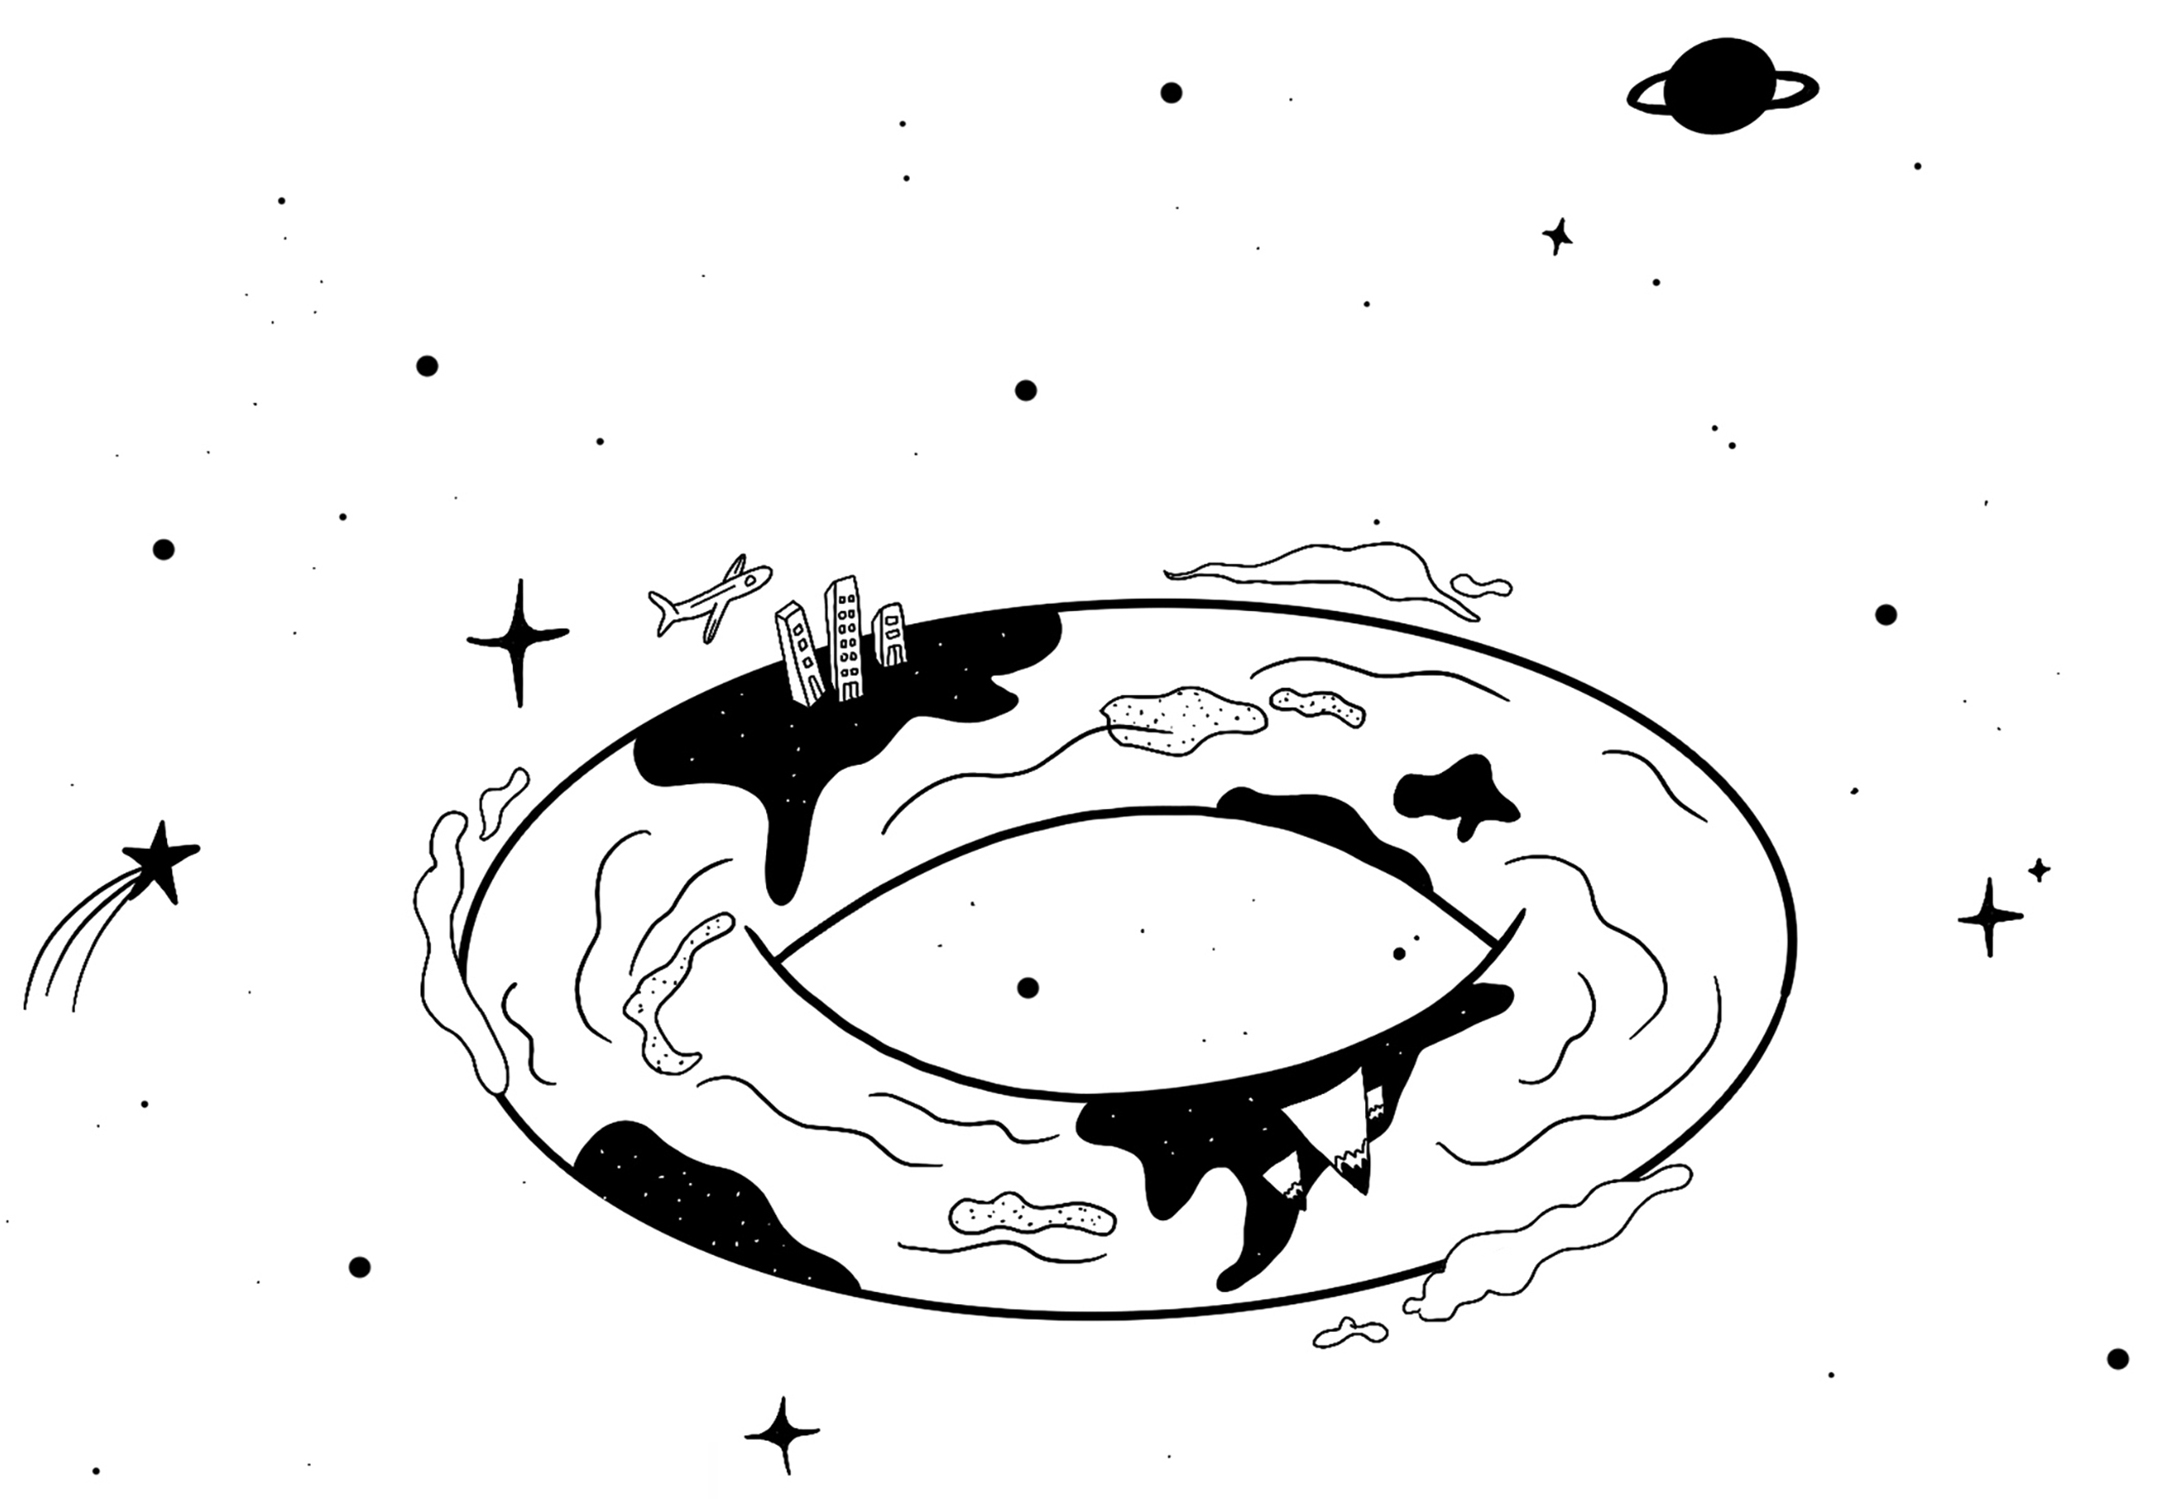 Black and white illustration of a donut-shaped earth